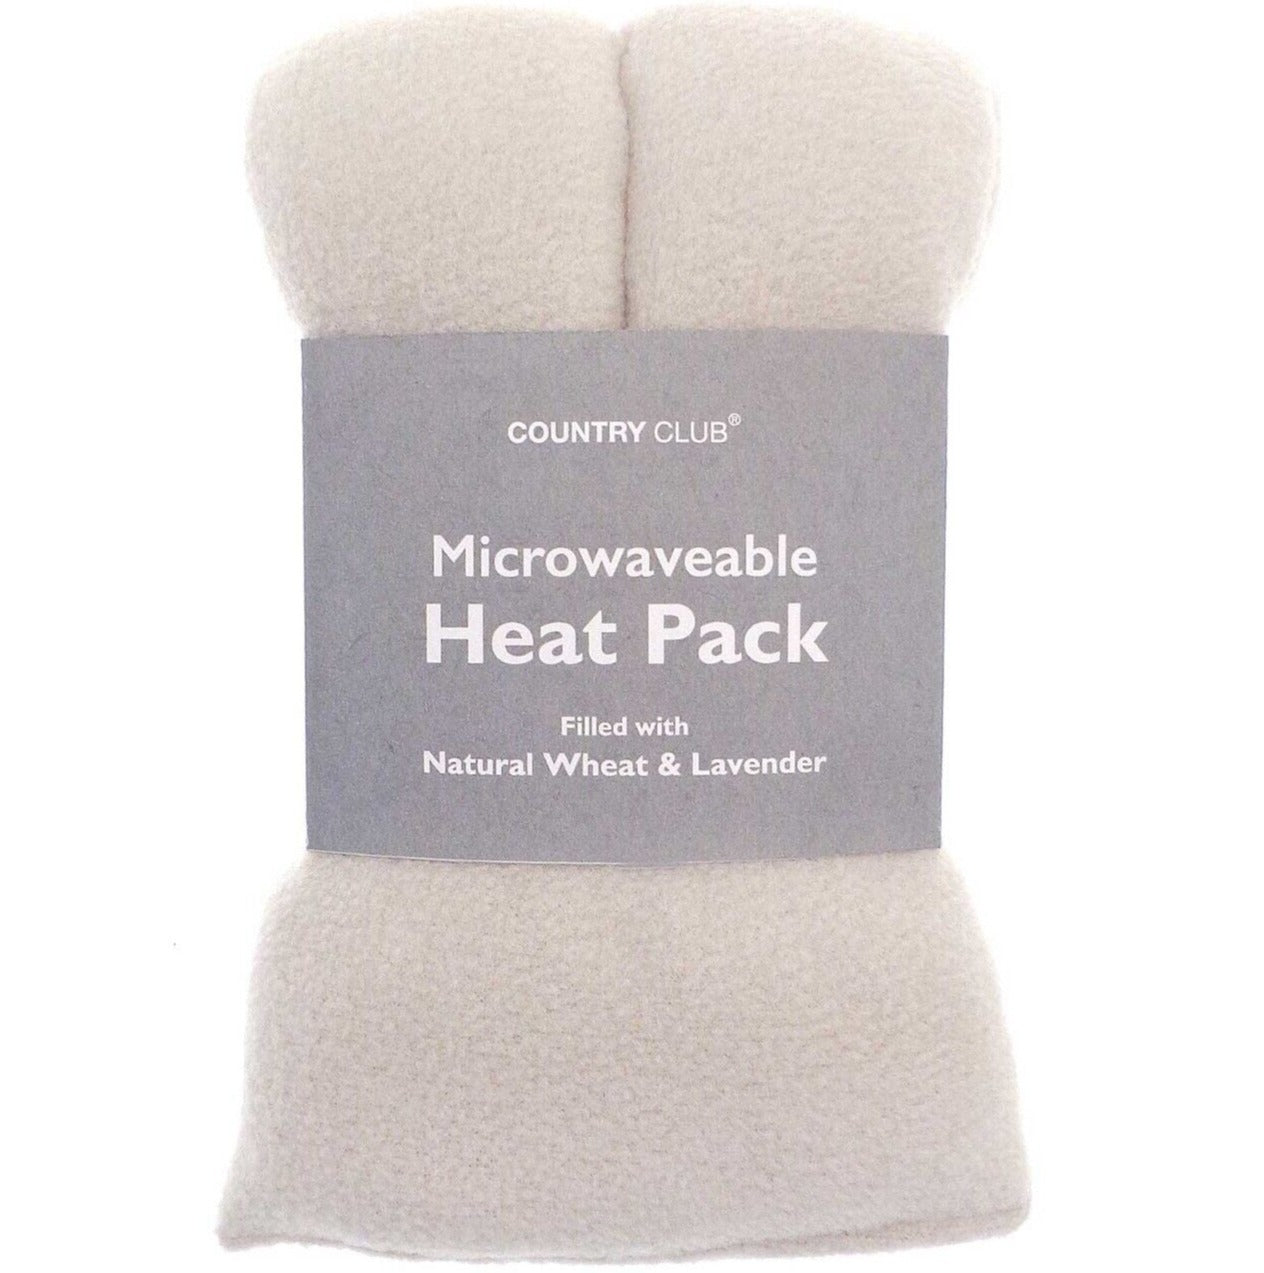 Microwaveable Heat Pack filled with Natural Wheat